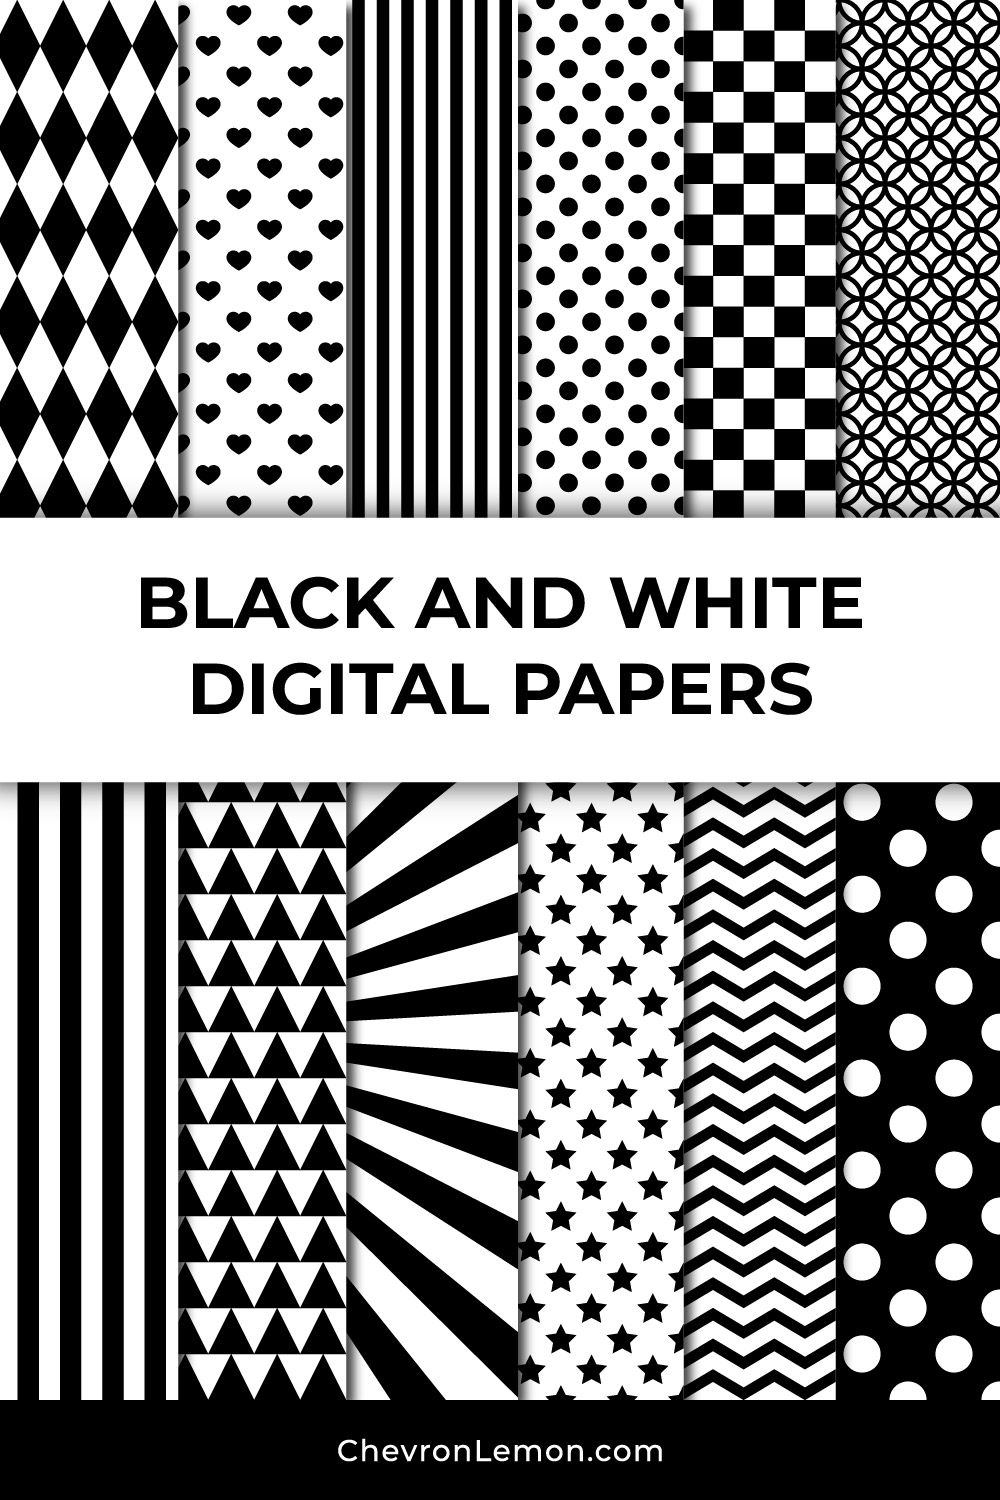 Black and white digital paper pack